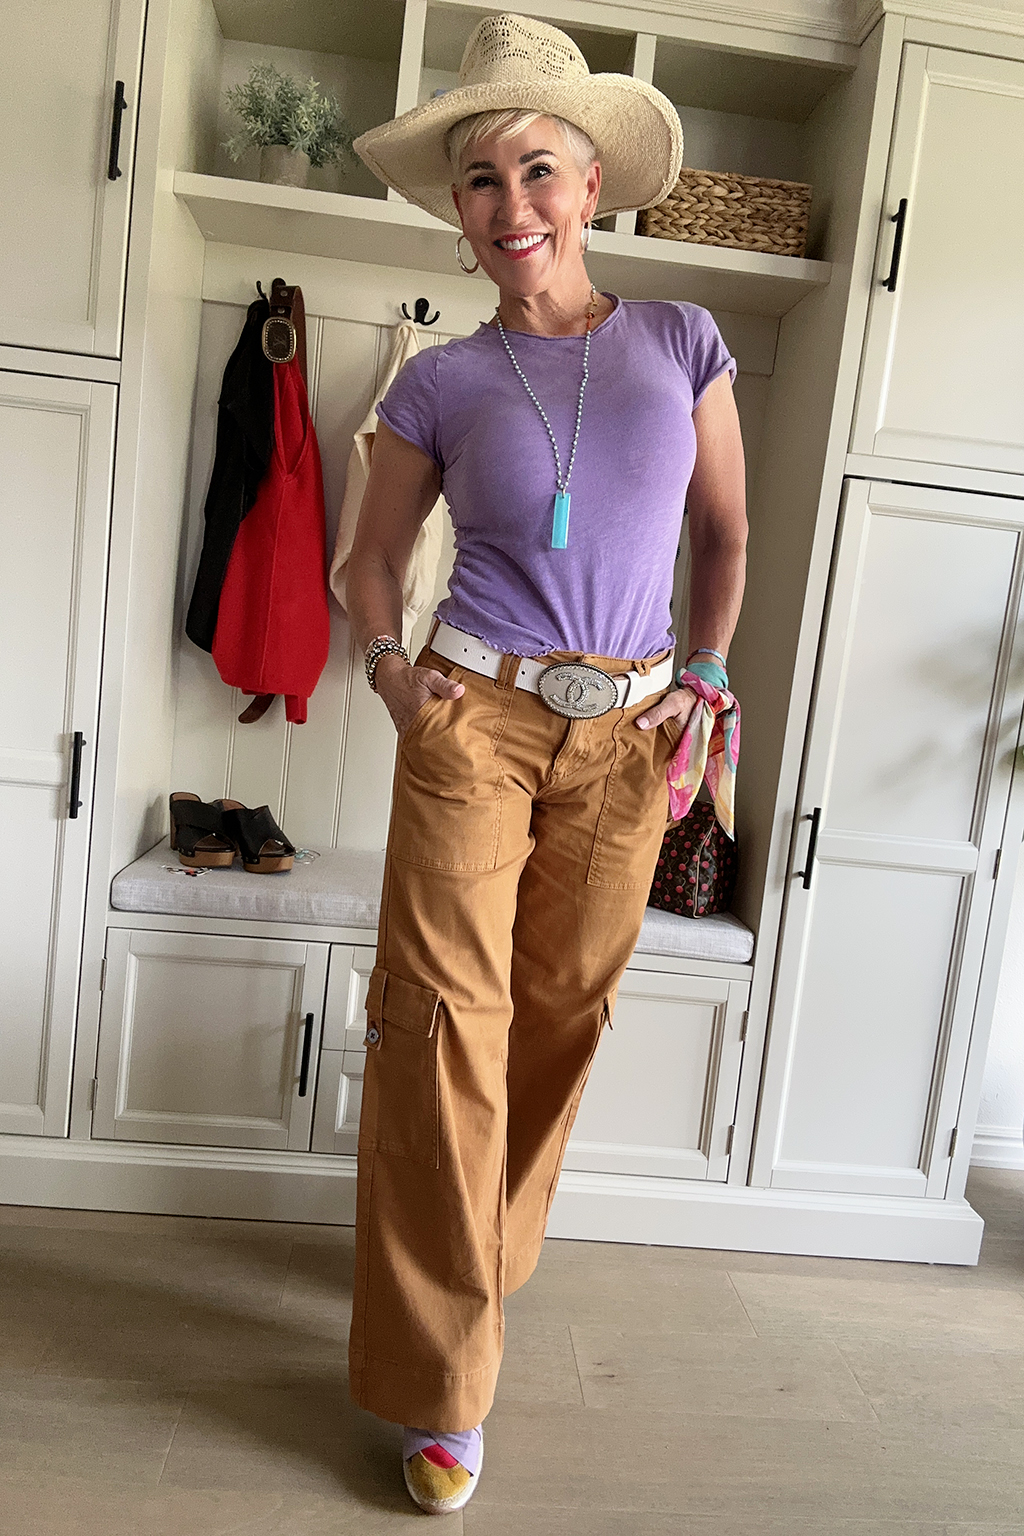 Fashion for Women Over 50 - Trendy Clothing Ideas  Over 50 womens fashion,  Fall outfits for women over 50, Clothes for women over 50